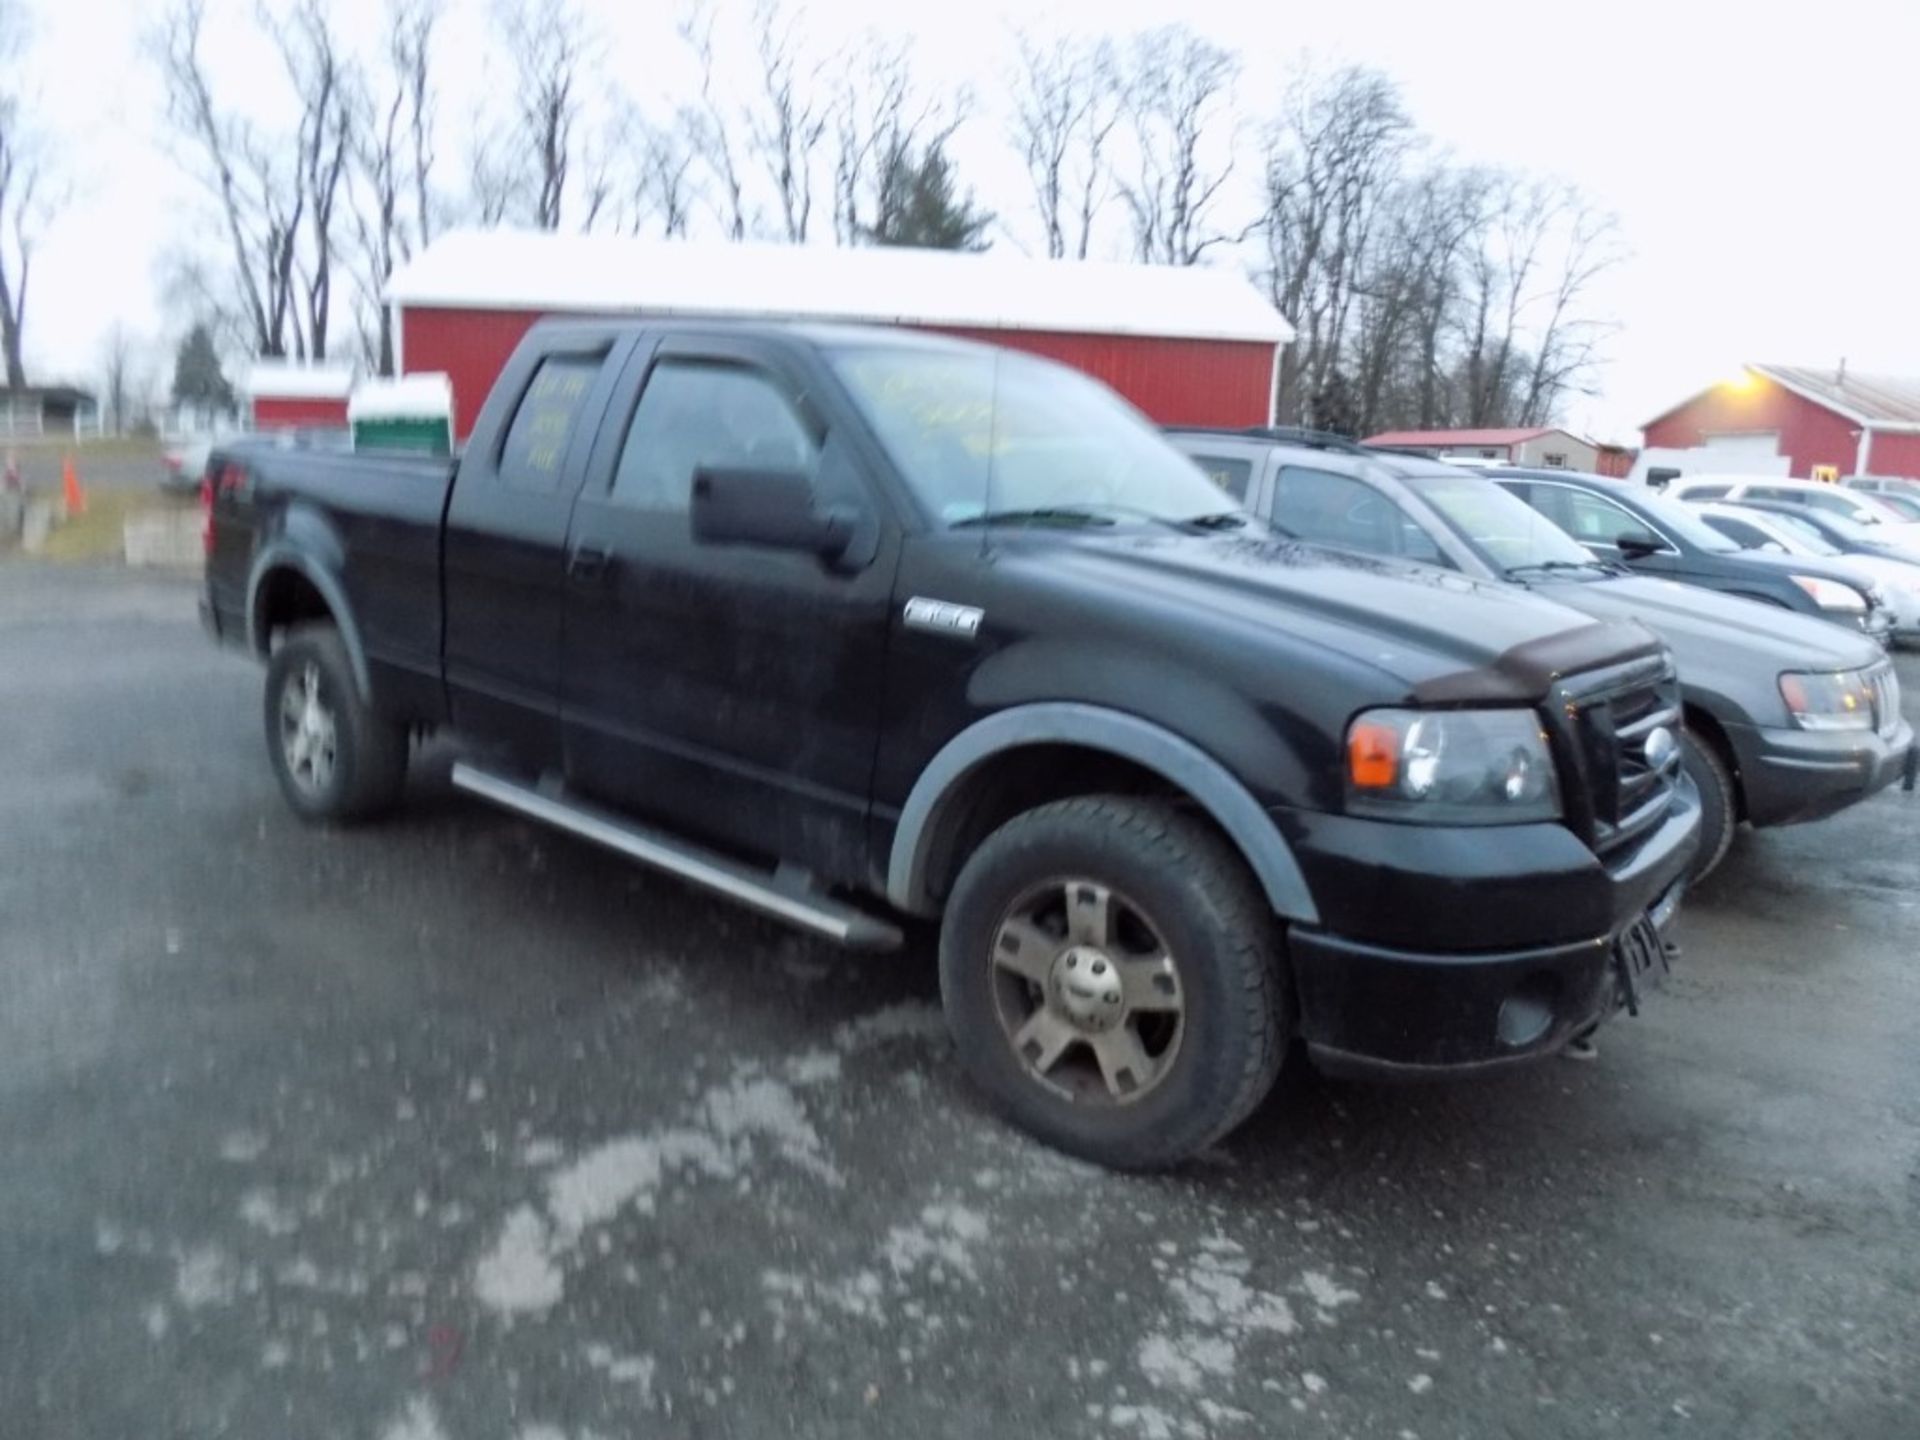 2008 Ford F150 Ext. Cab FX4, 4x4, Leather, Black, 141,861 Mi, Vin# 1FTPX14528FB94660 - OPEN TO ALL